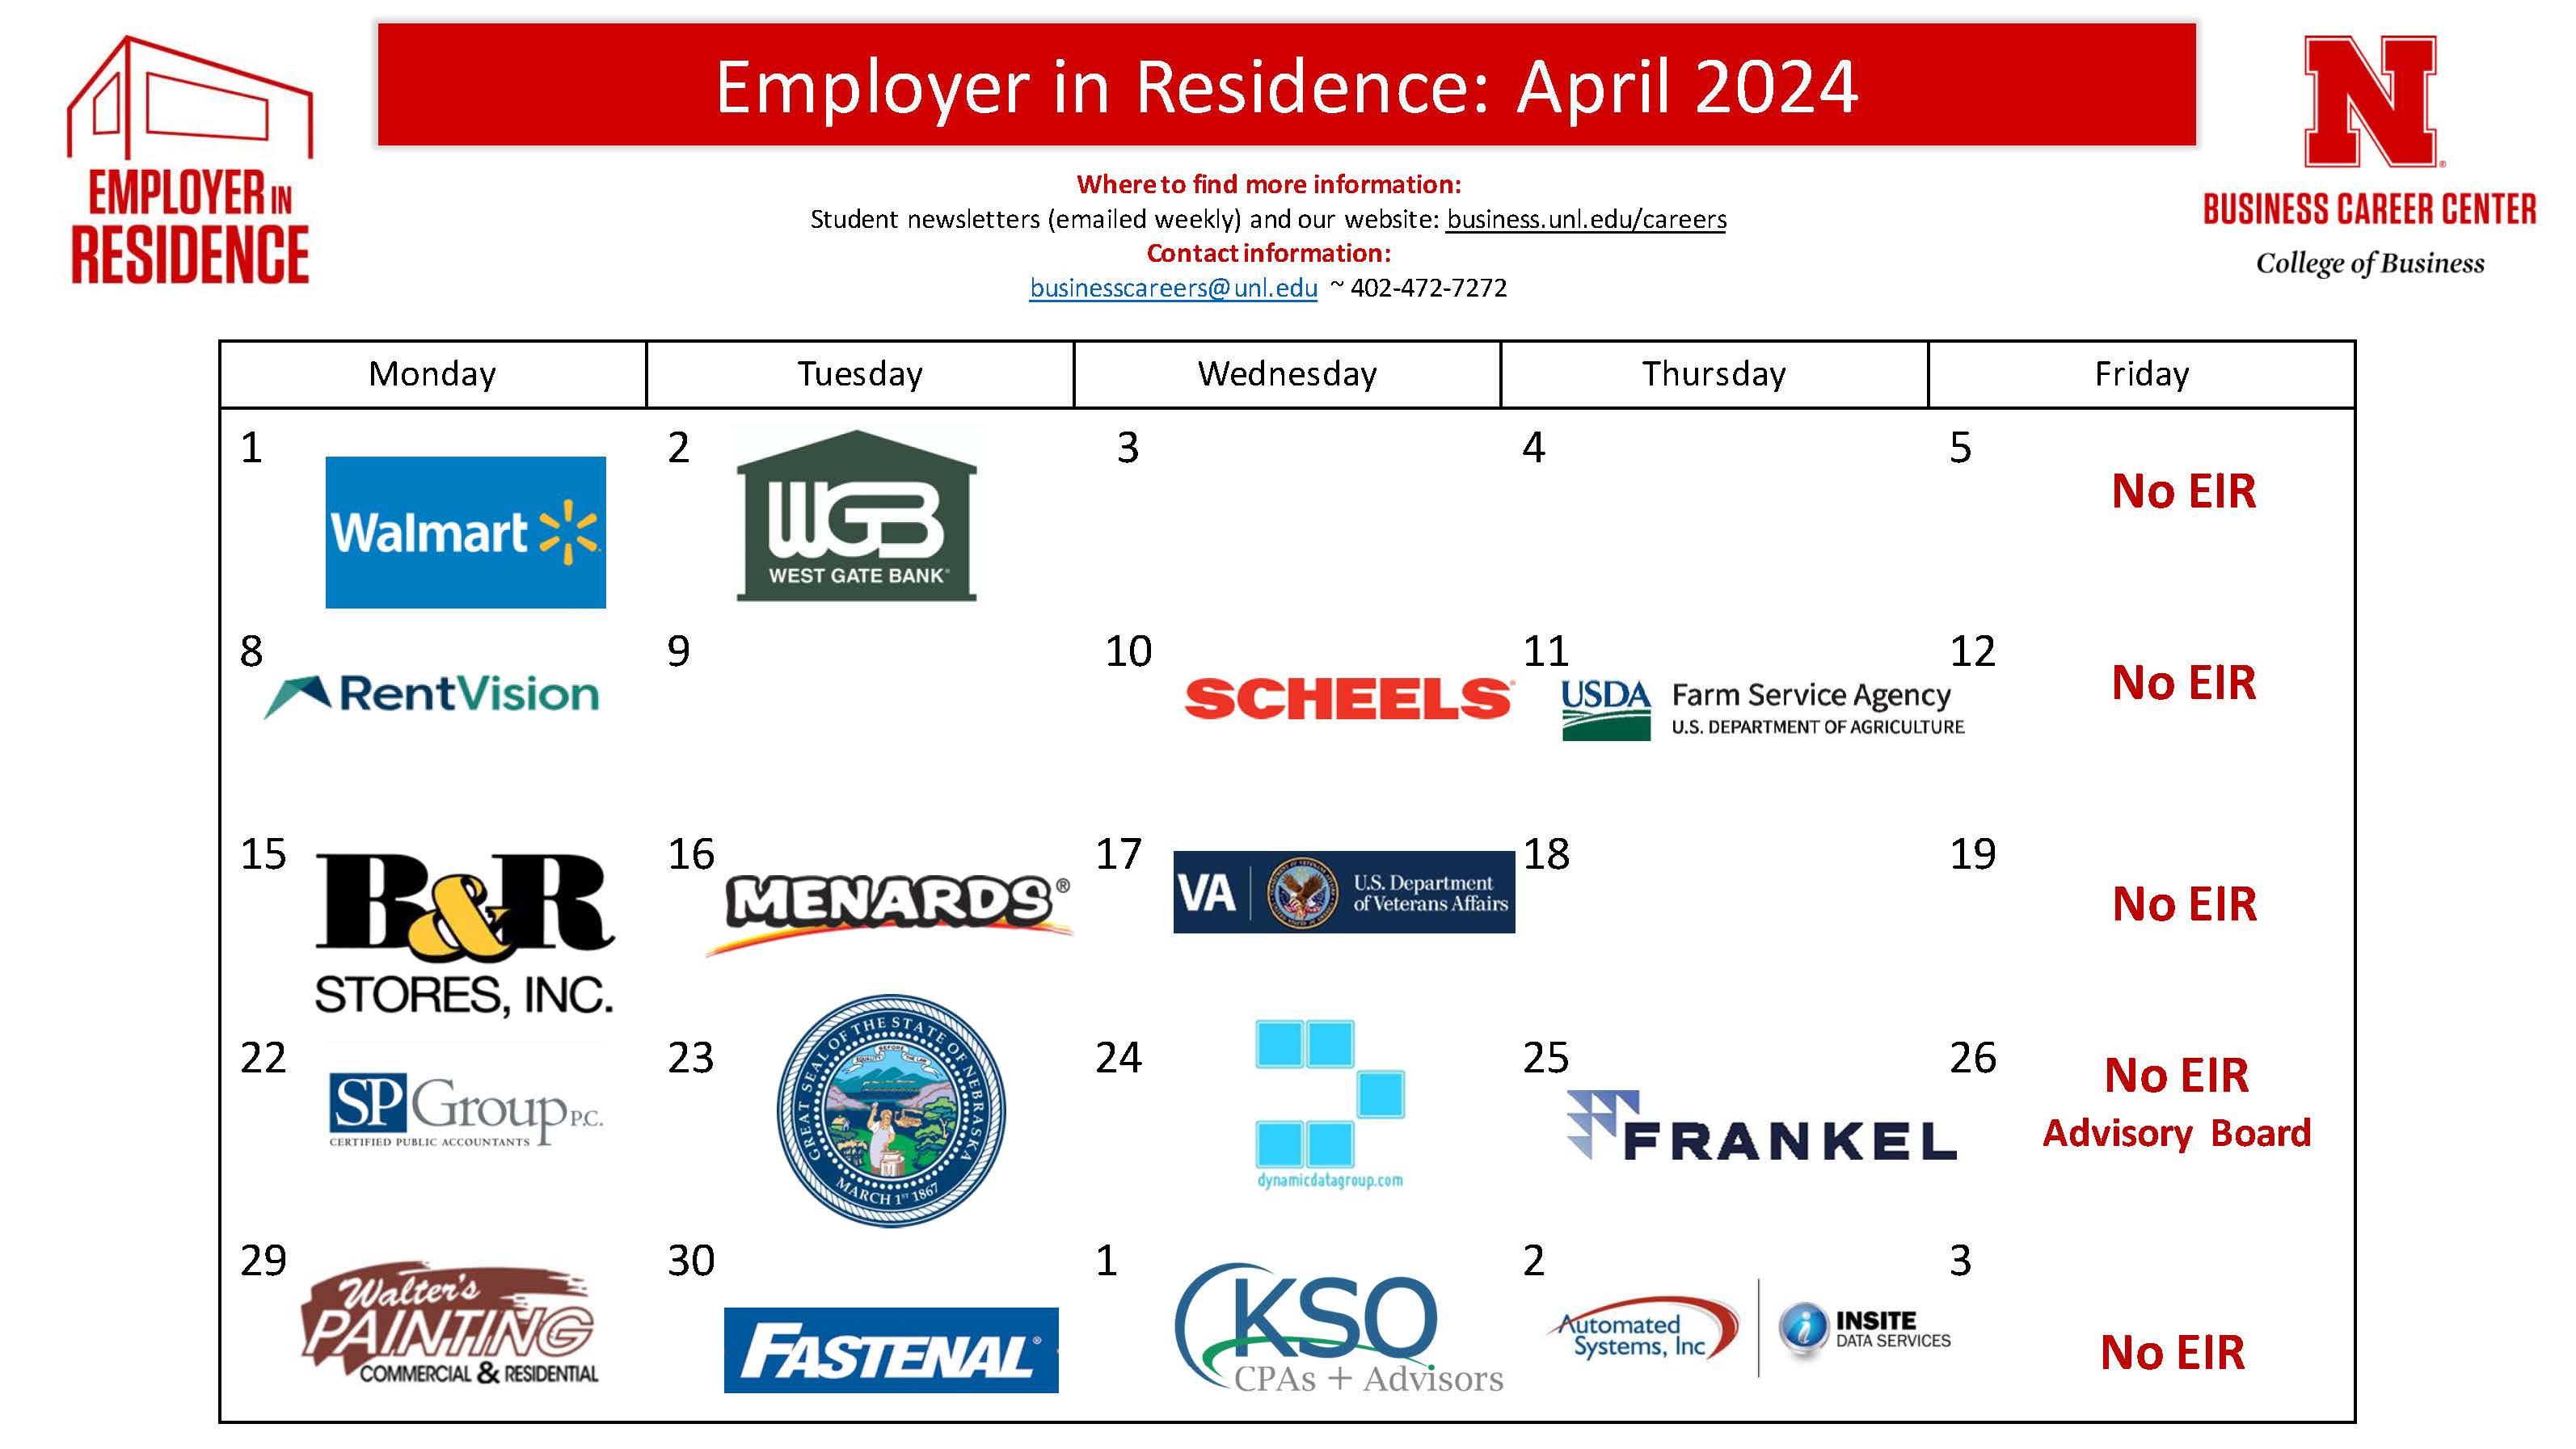 Employer in Residence | Calendar for April / May 2024